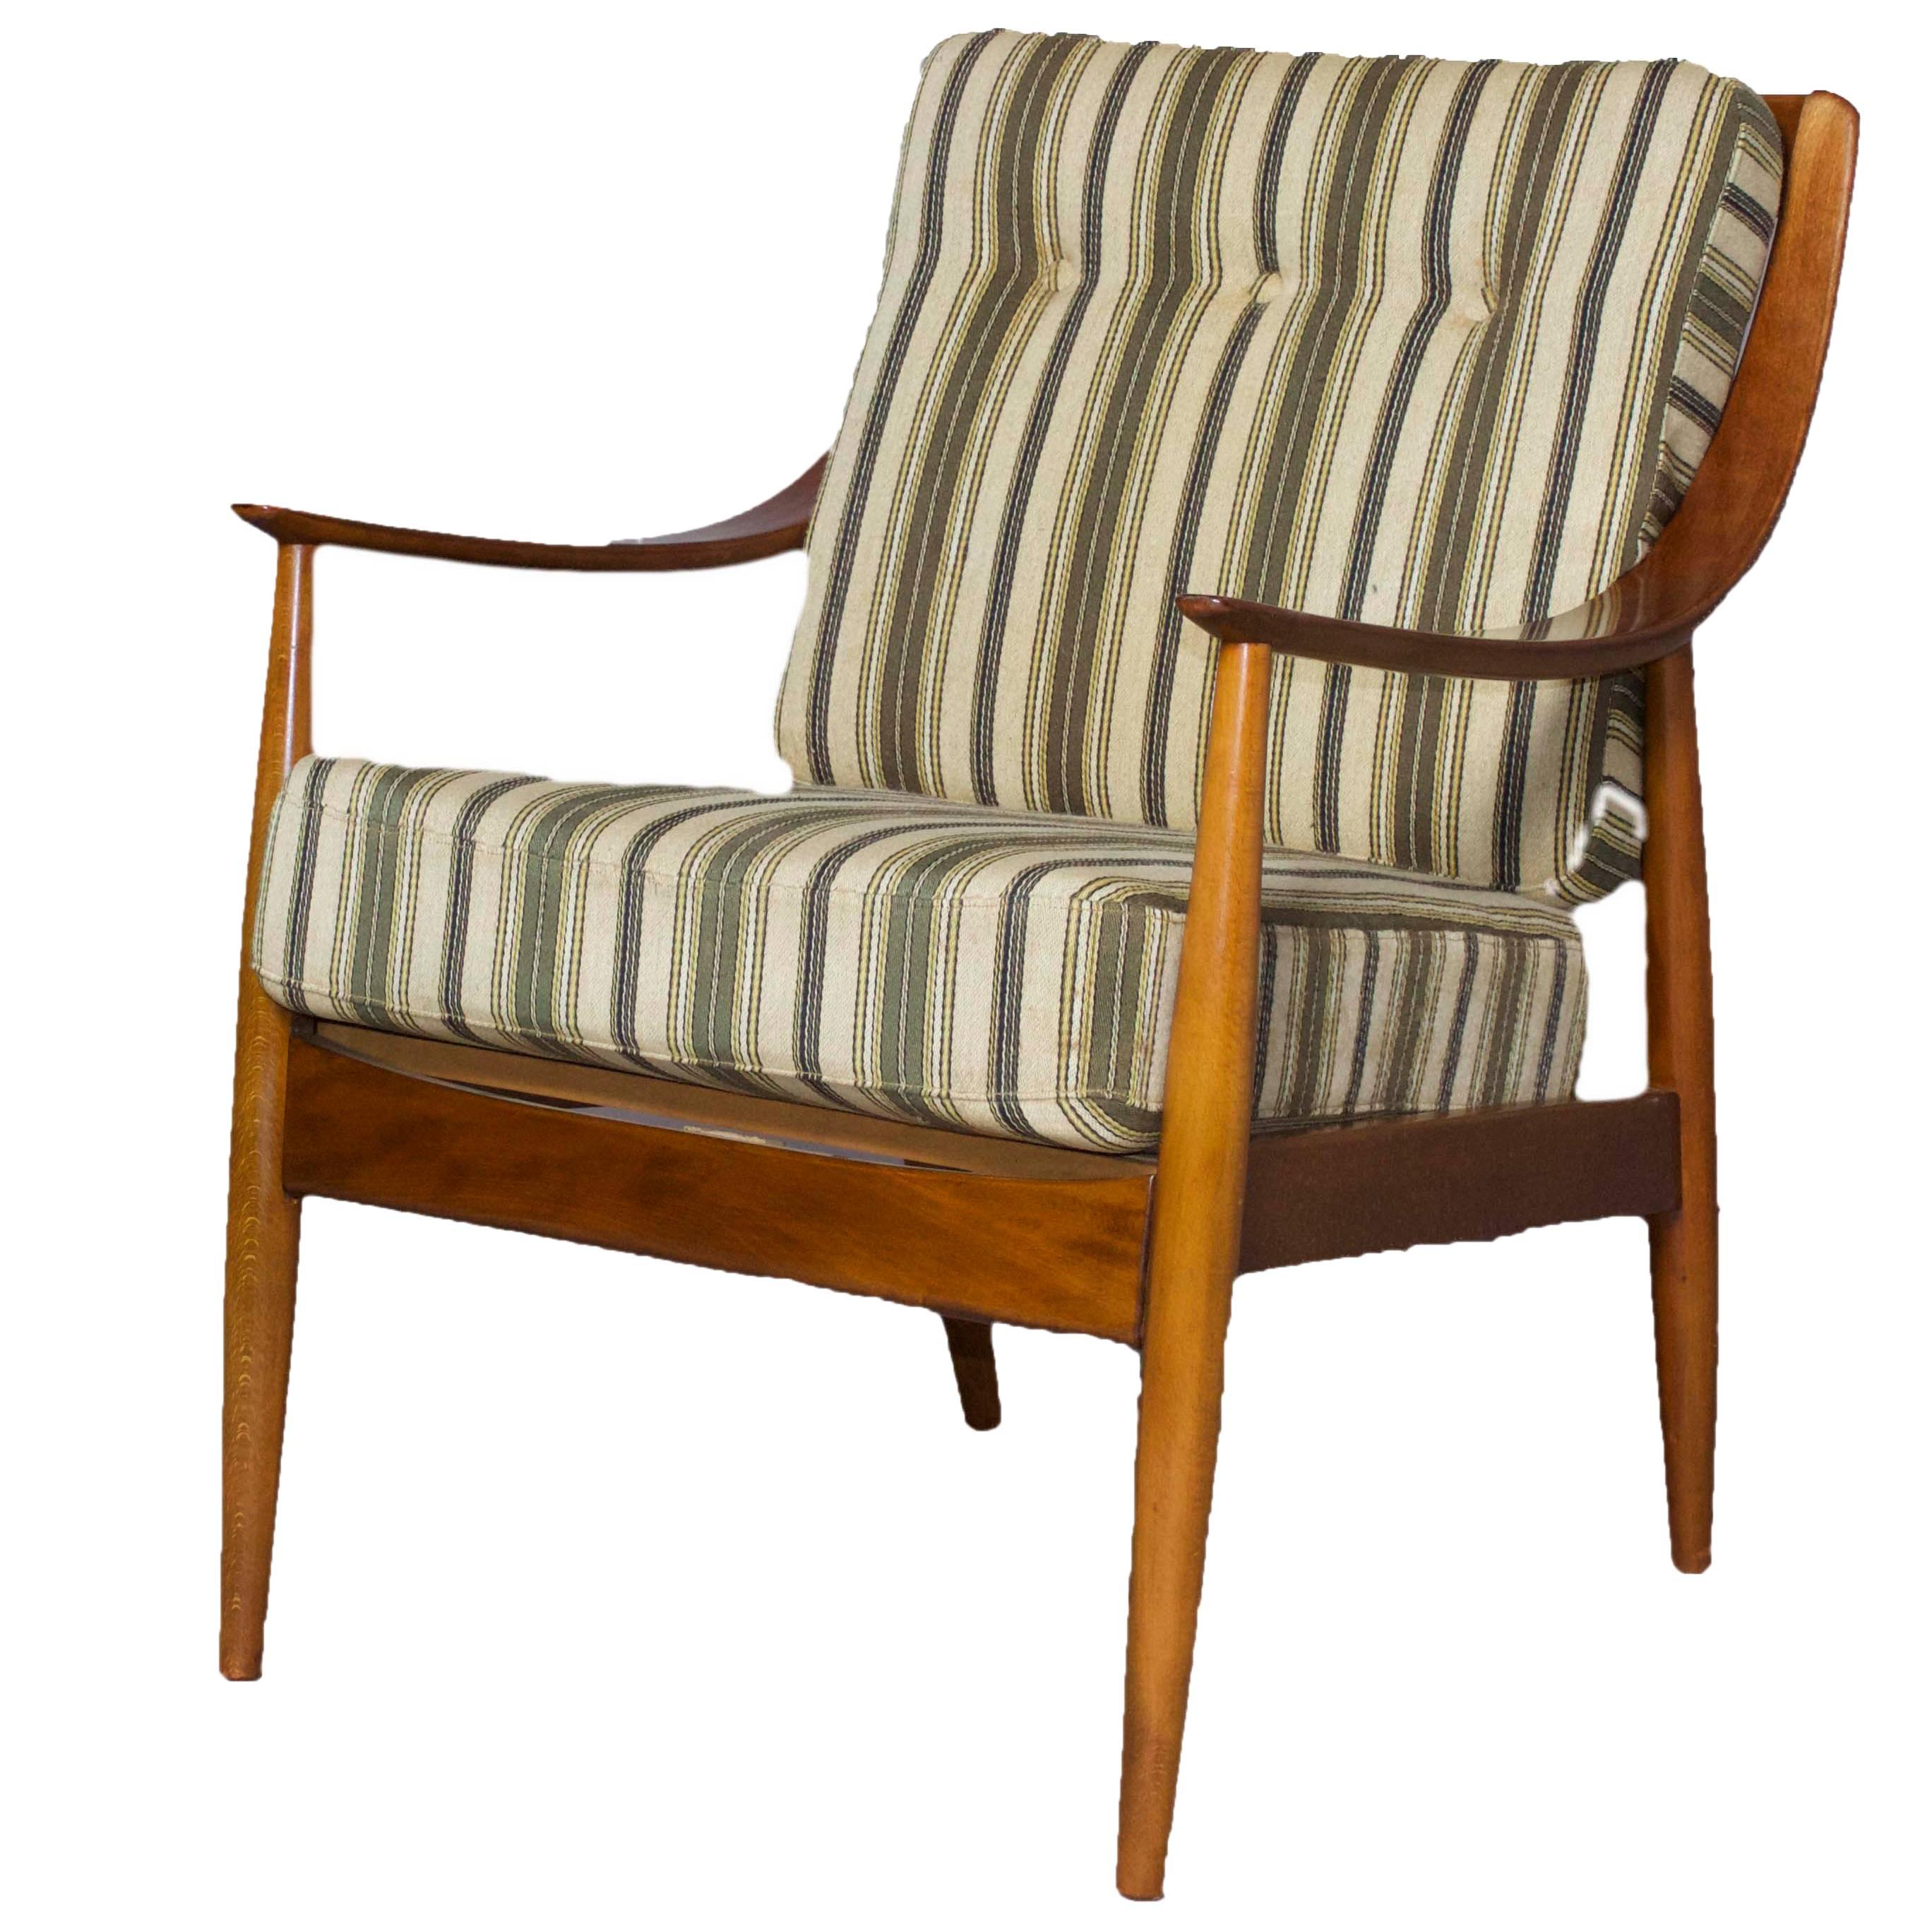 Hvidt and Molgaard Armchair Model FD-146 in Mahogany For Sale